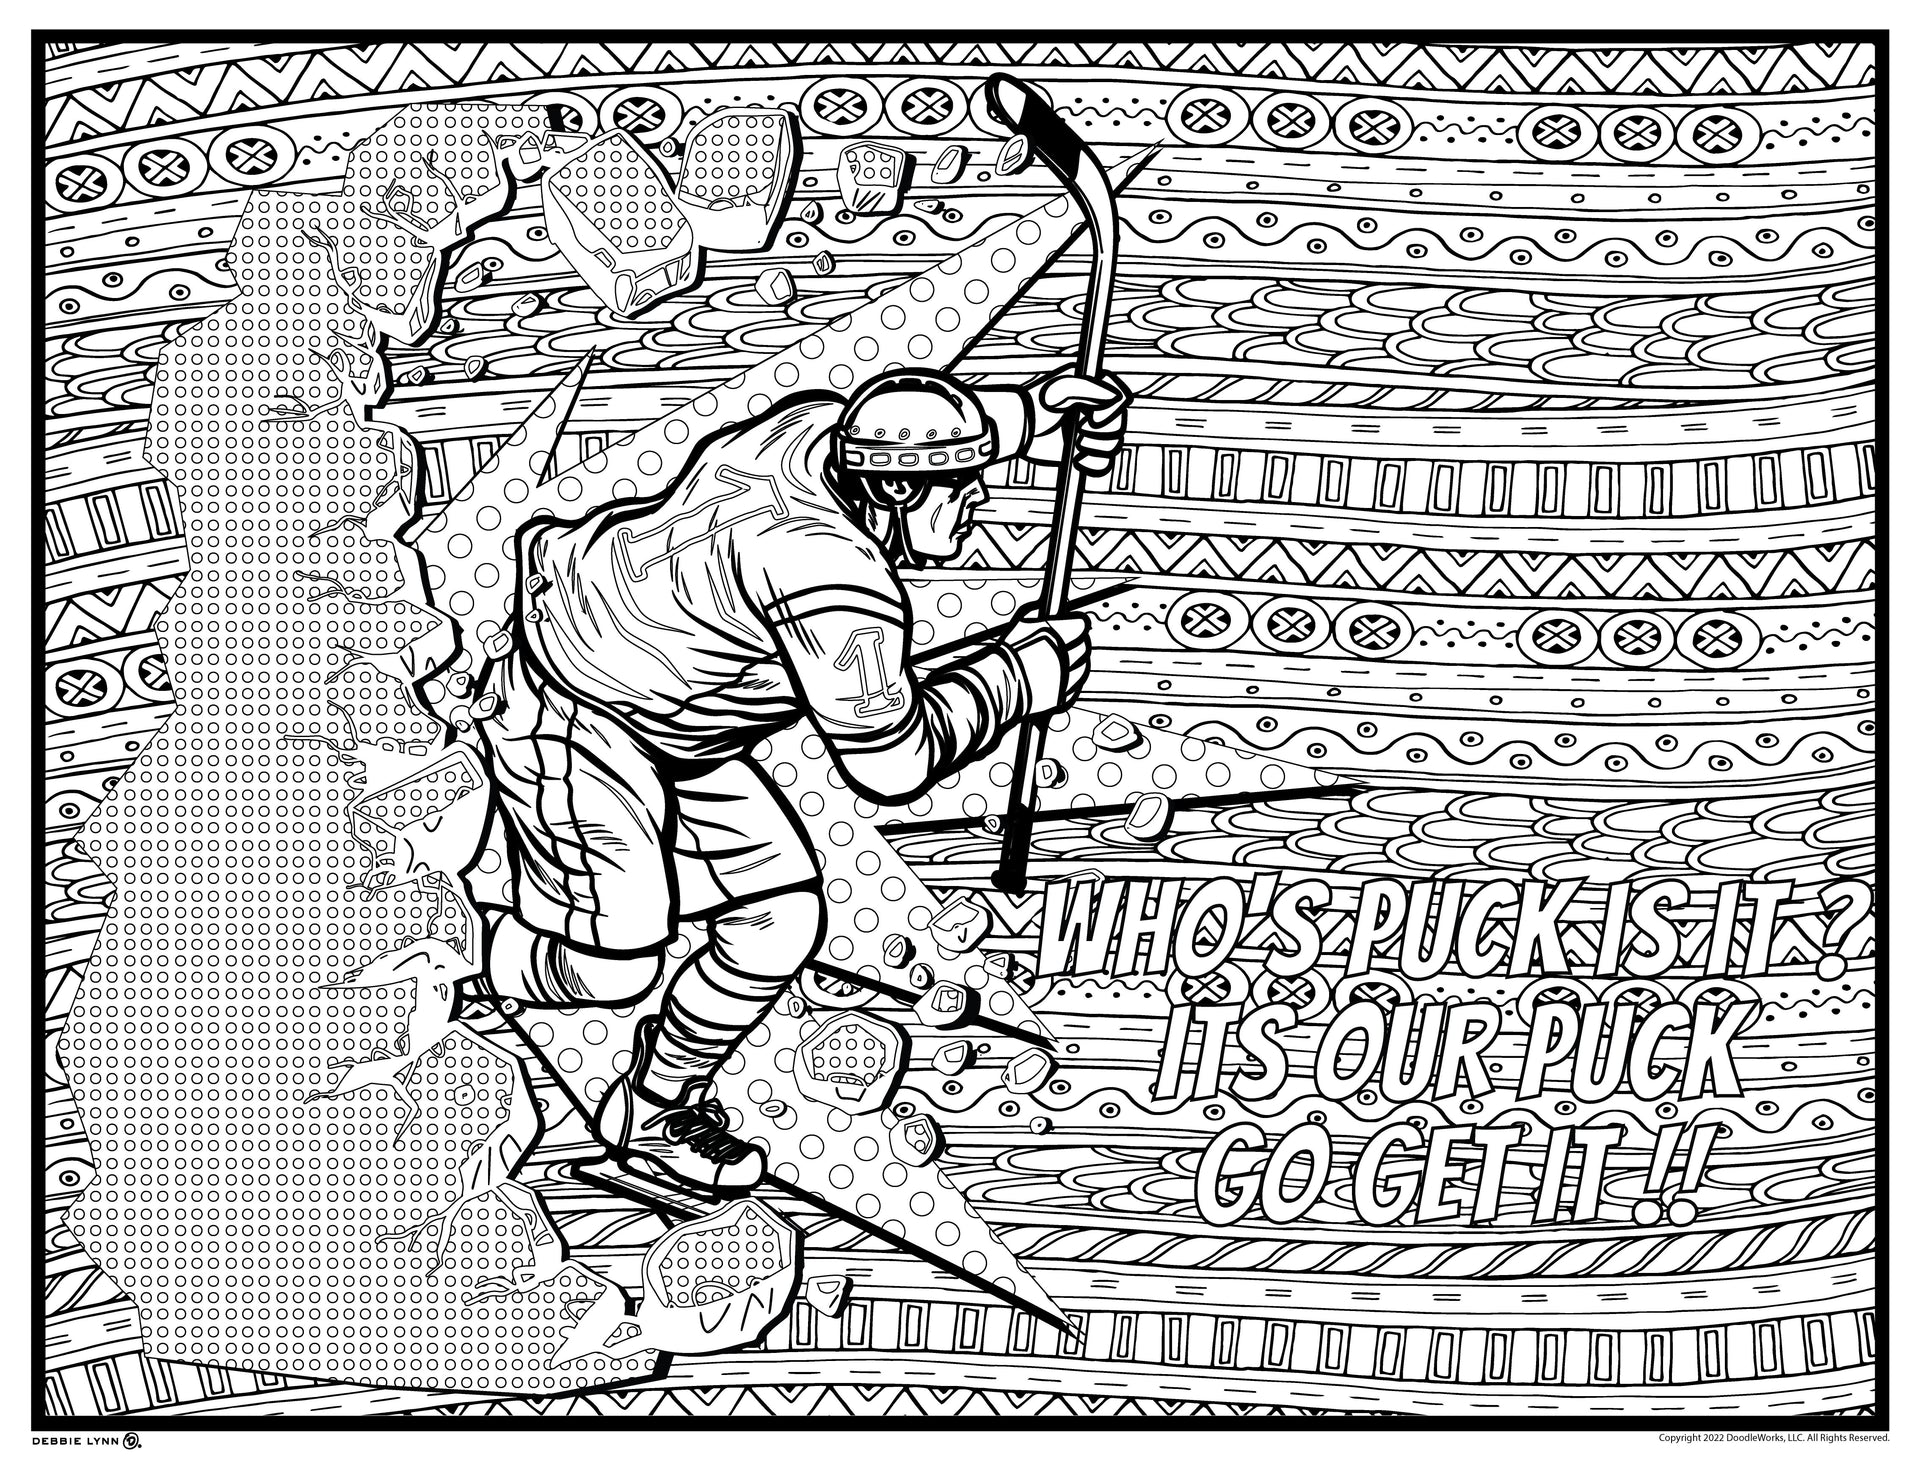 hockey net coloring page